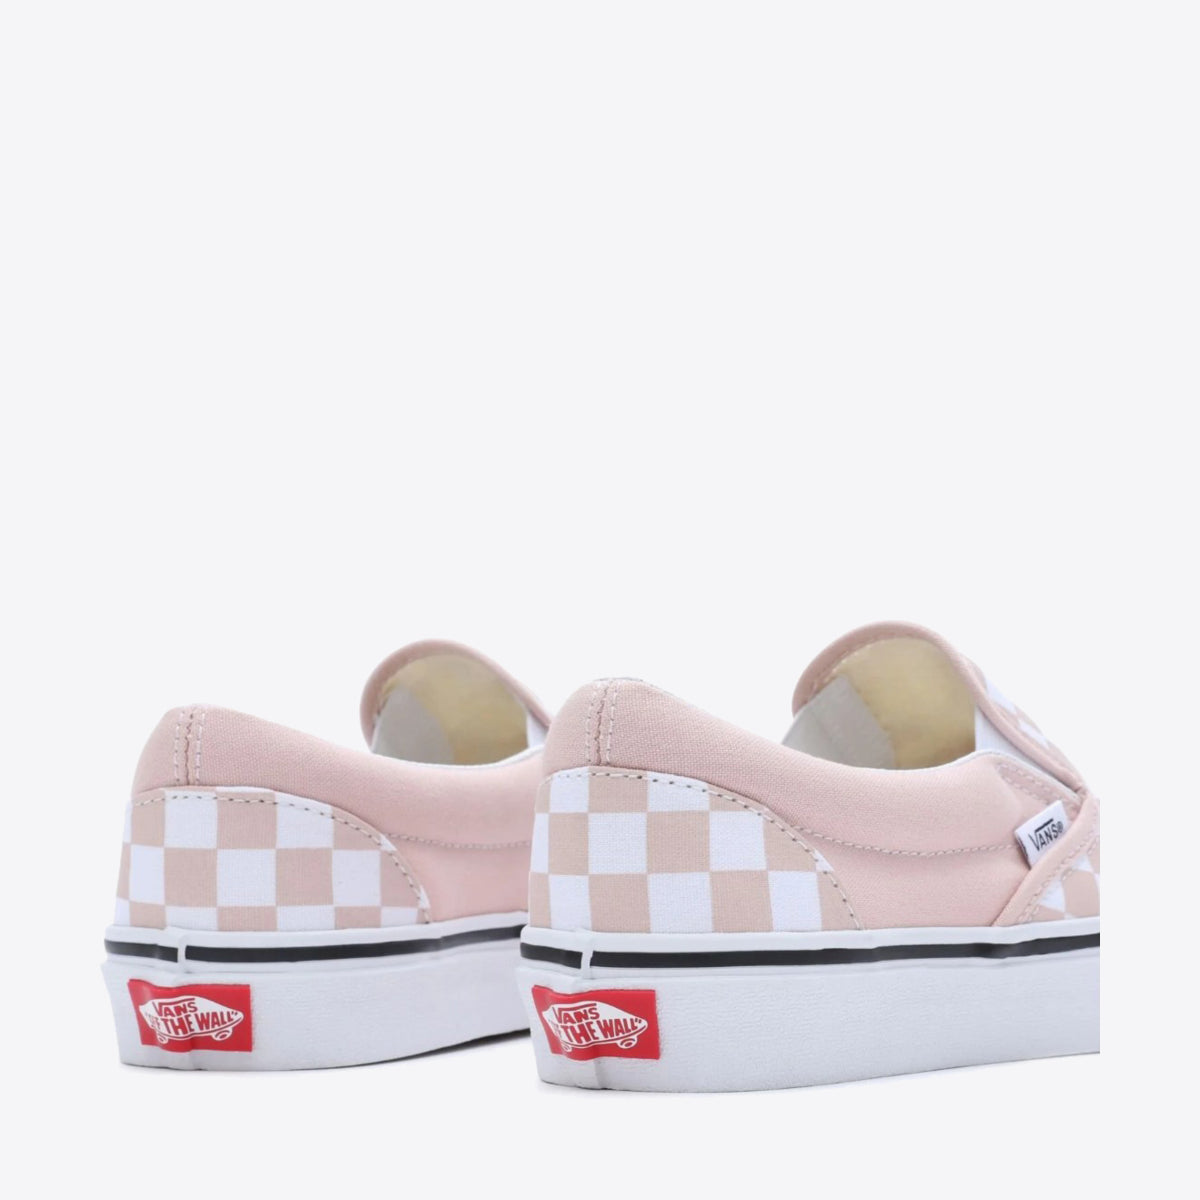 VANS Classic Slip-On Color Theory Checkerboard - Women's Rose Smoke - Image 4